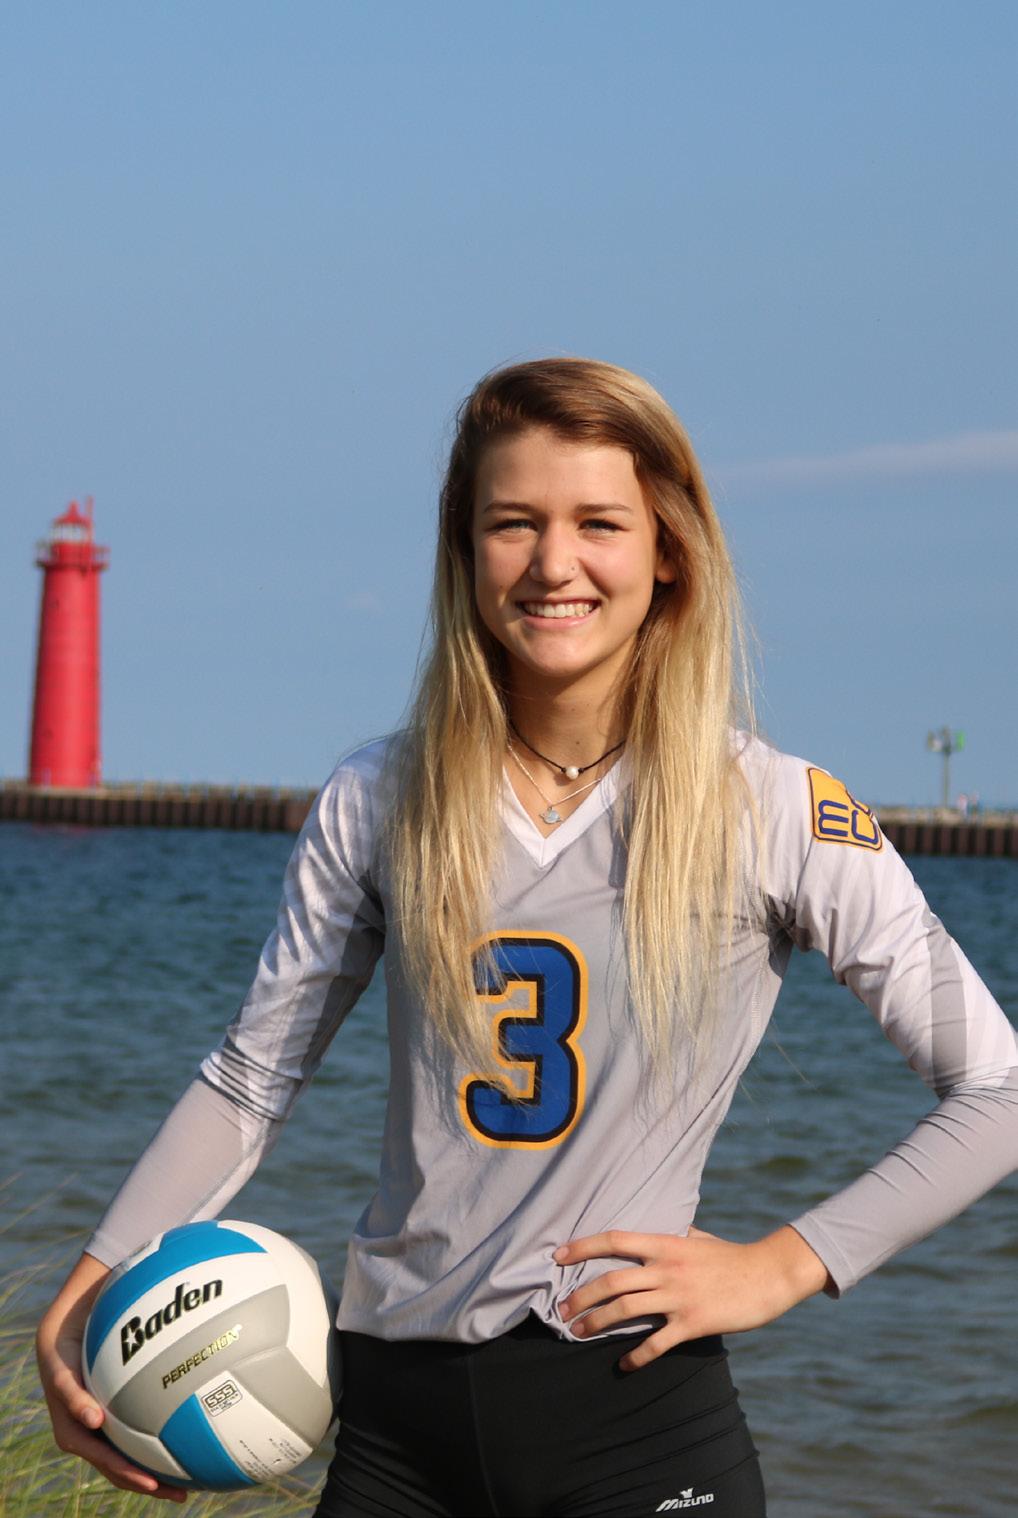 ..Chocolate Chip Cookies Favorite Movie:... Finding Nemo Hobbies:... Scuba diving & swimming Name:... Shelby Rasch Height:...5 5 Position:...DS/Libero Parents:... Duane & Amy Rasch Hometown:.